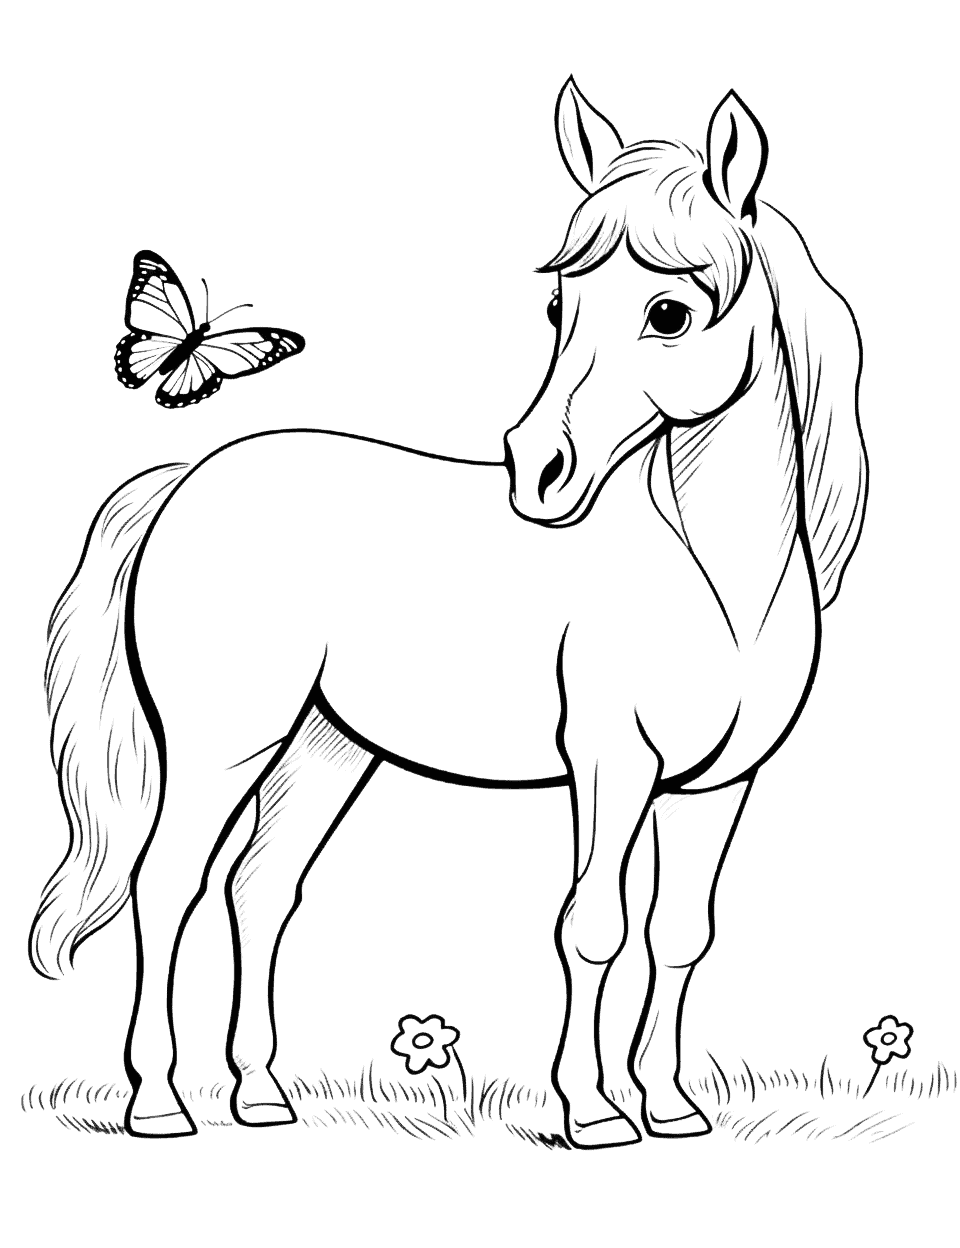 Cute Foal and Butterfly Horse Coloring Page - A cute foal curiously looking at a butterfly flying through the air.